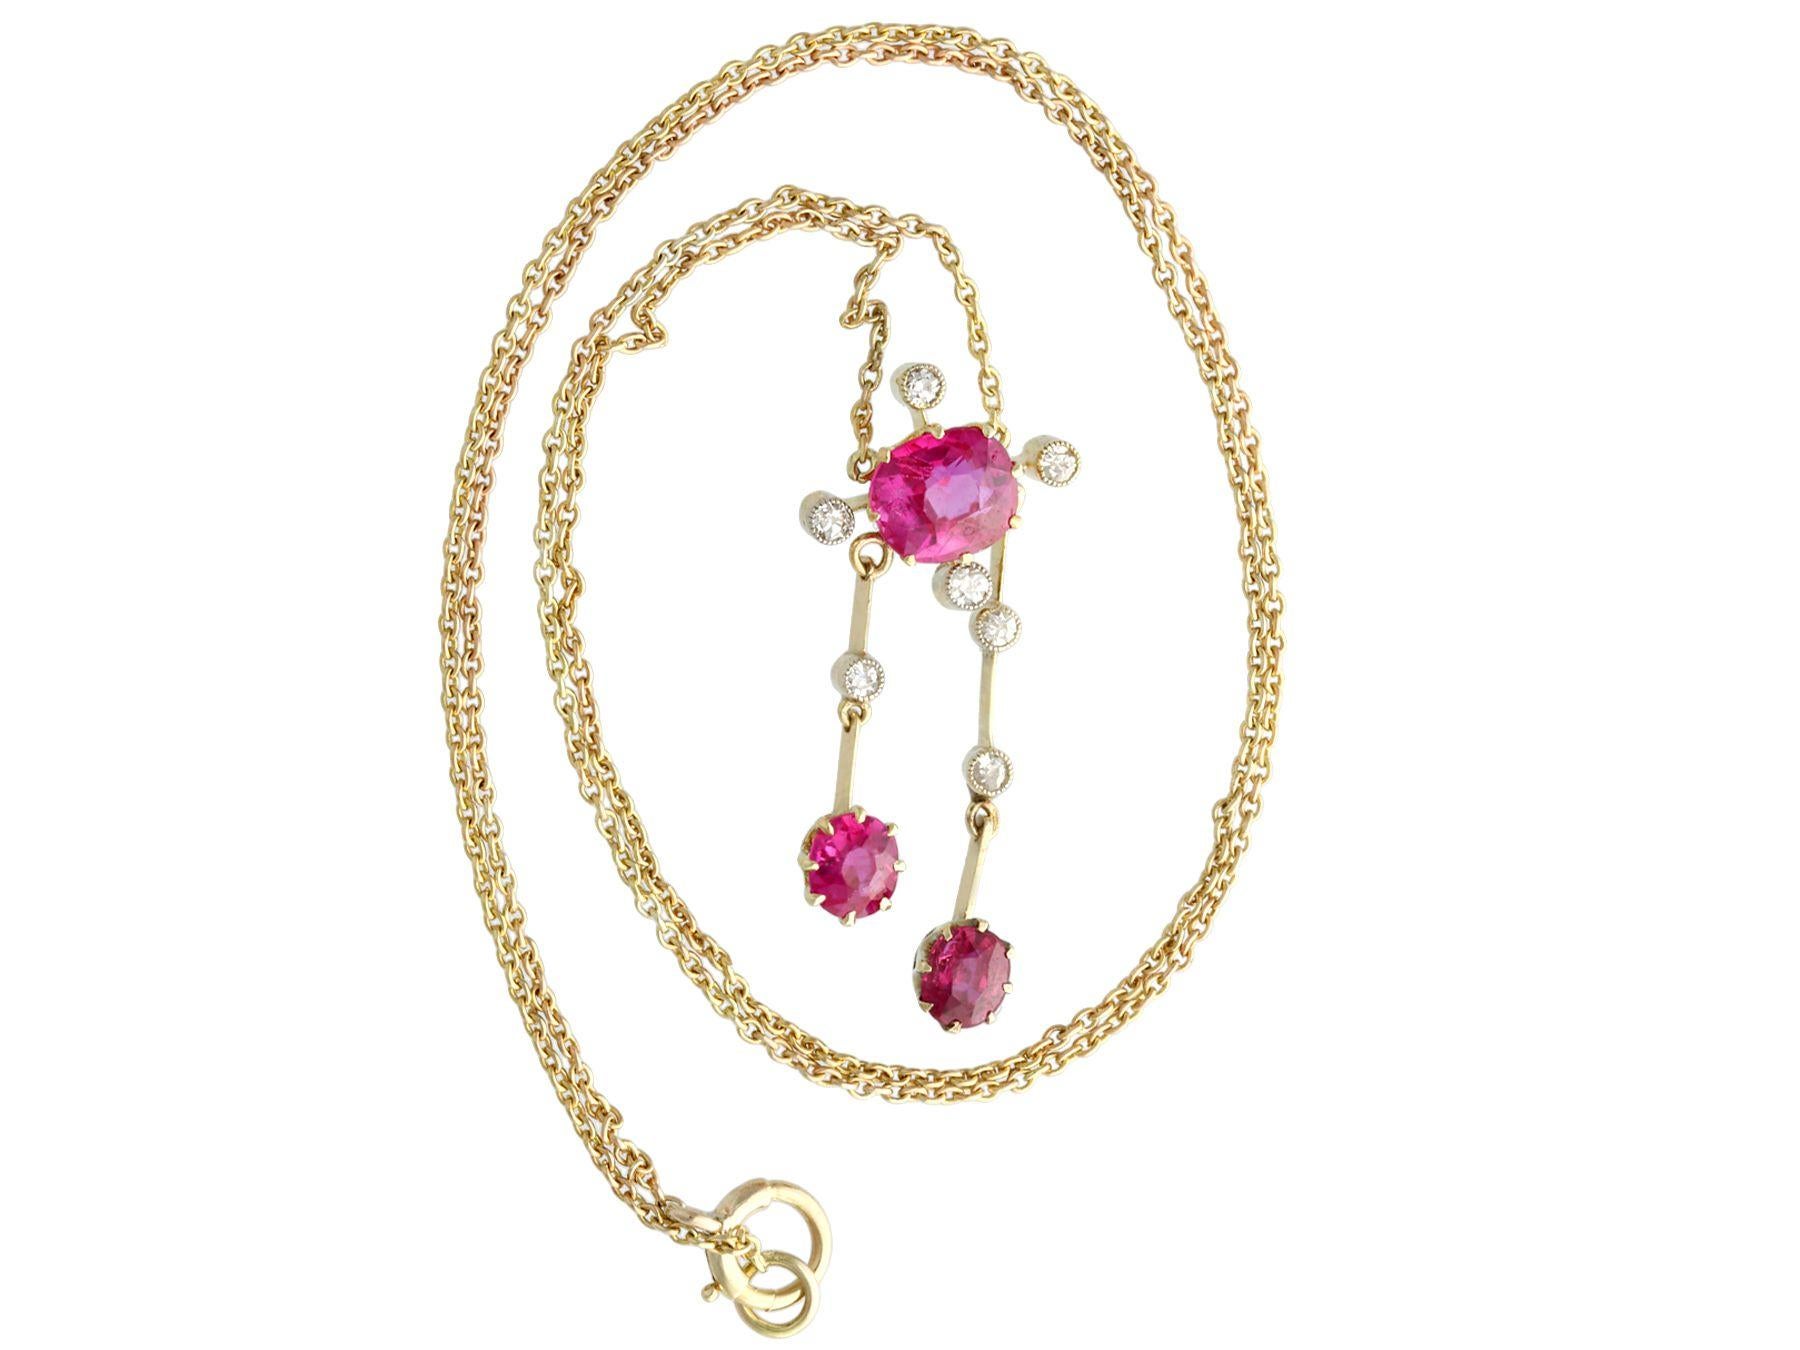 A stunning antique 2.29 carat ruby and 0.21 carat diamond, 15k yellow and white gold drop pendant; part of our diverse antique jewelry and estate jewelry collections.

This stunning, fine and impressive ruby and diamond drop necklace has been